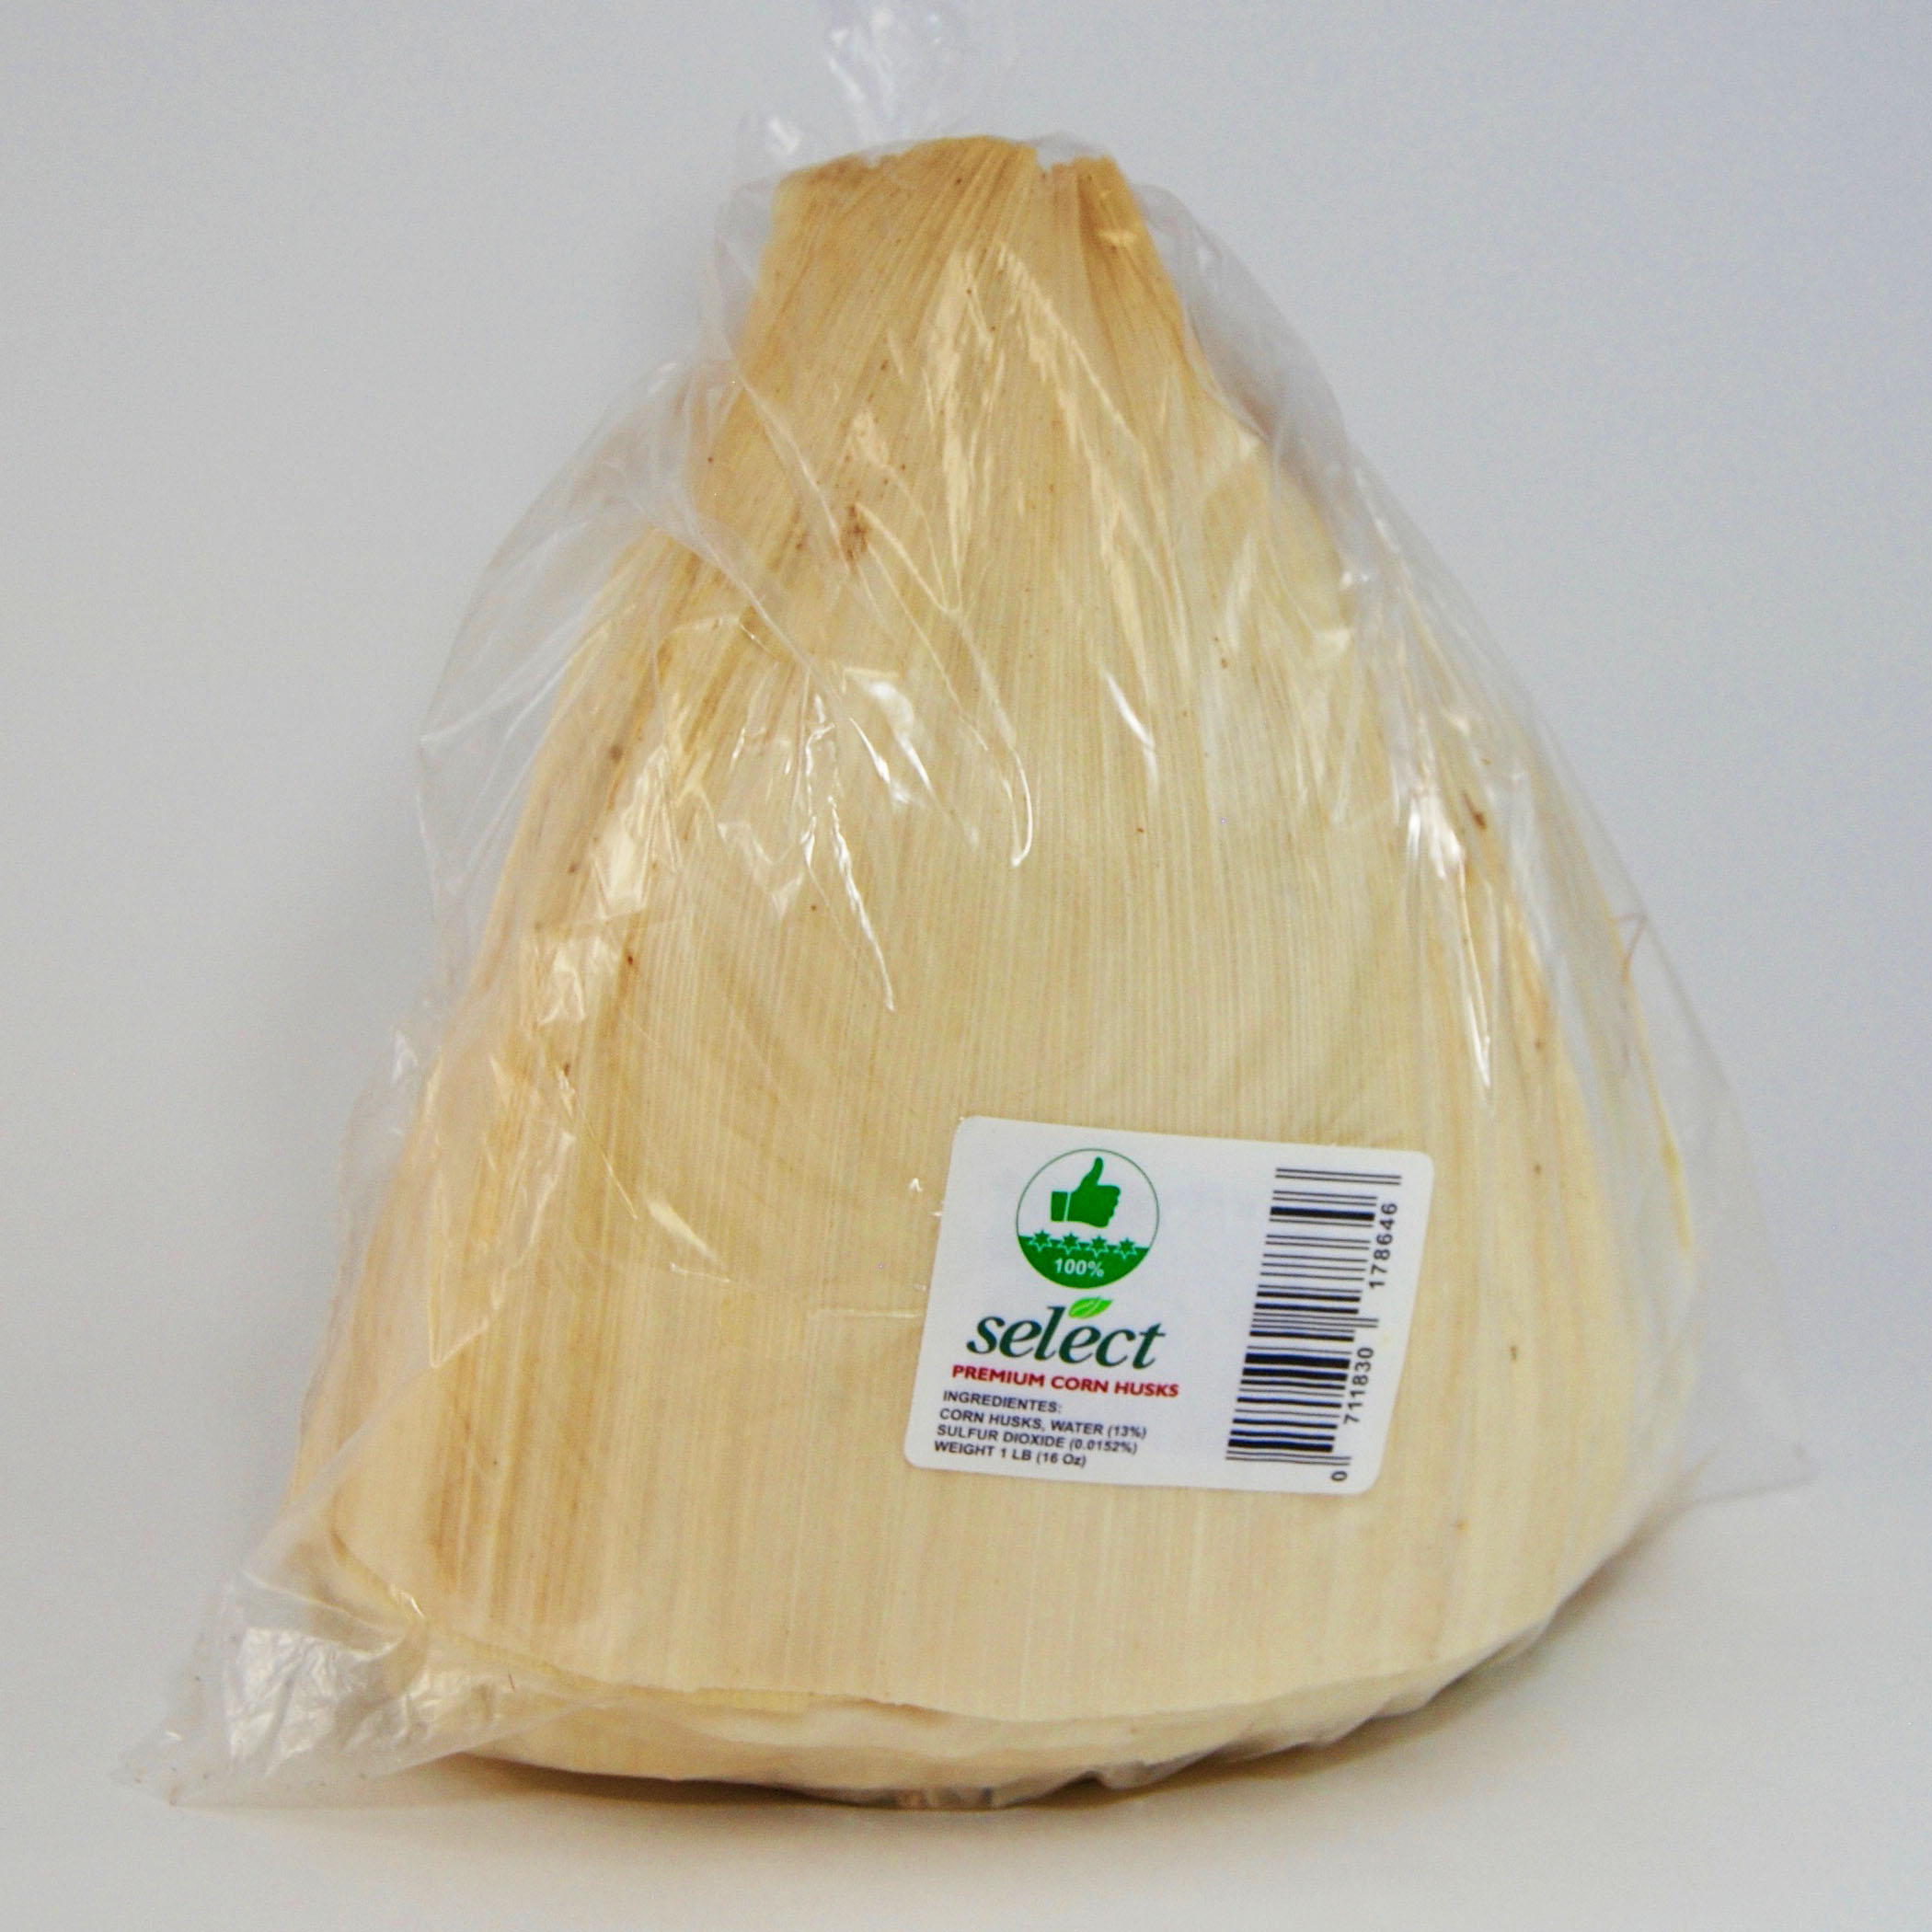 Corn Husks - Premium Quality - 100% Natural - 1 Pound - MEXICAN STYLE!